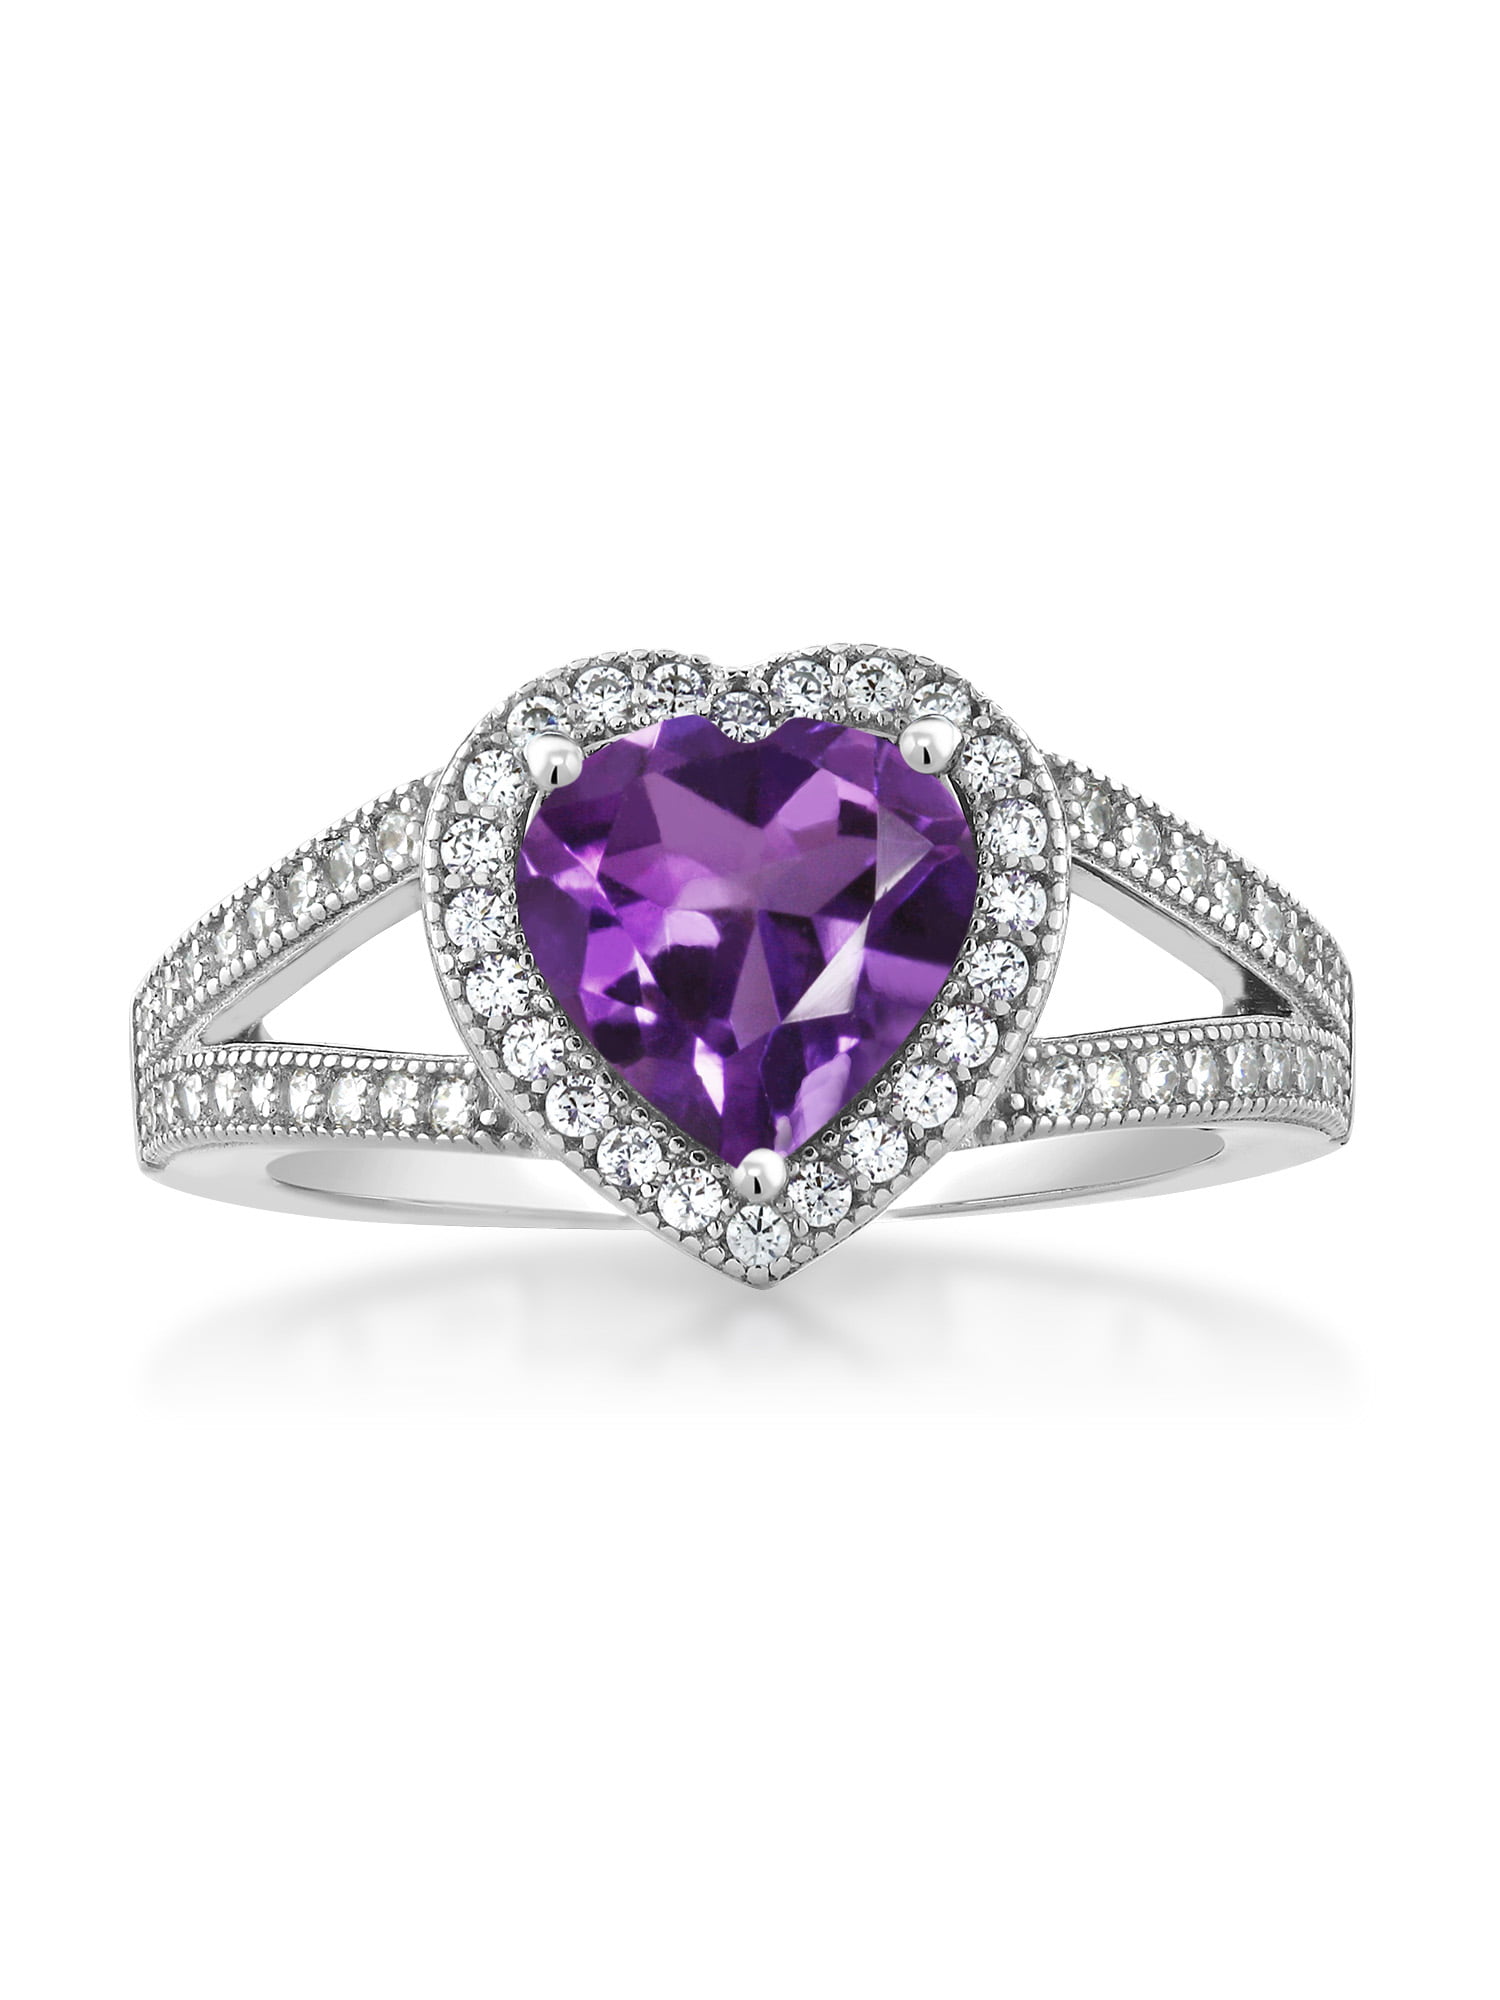 Details about   EARTH MINED 9MM AFRICAN AMETHYST HEART DESIGN STERLING SILVER 925 RING SIZE 8